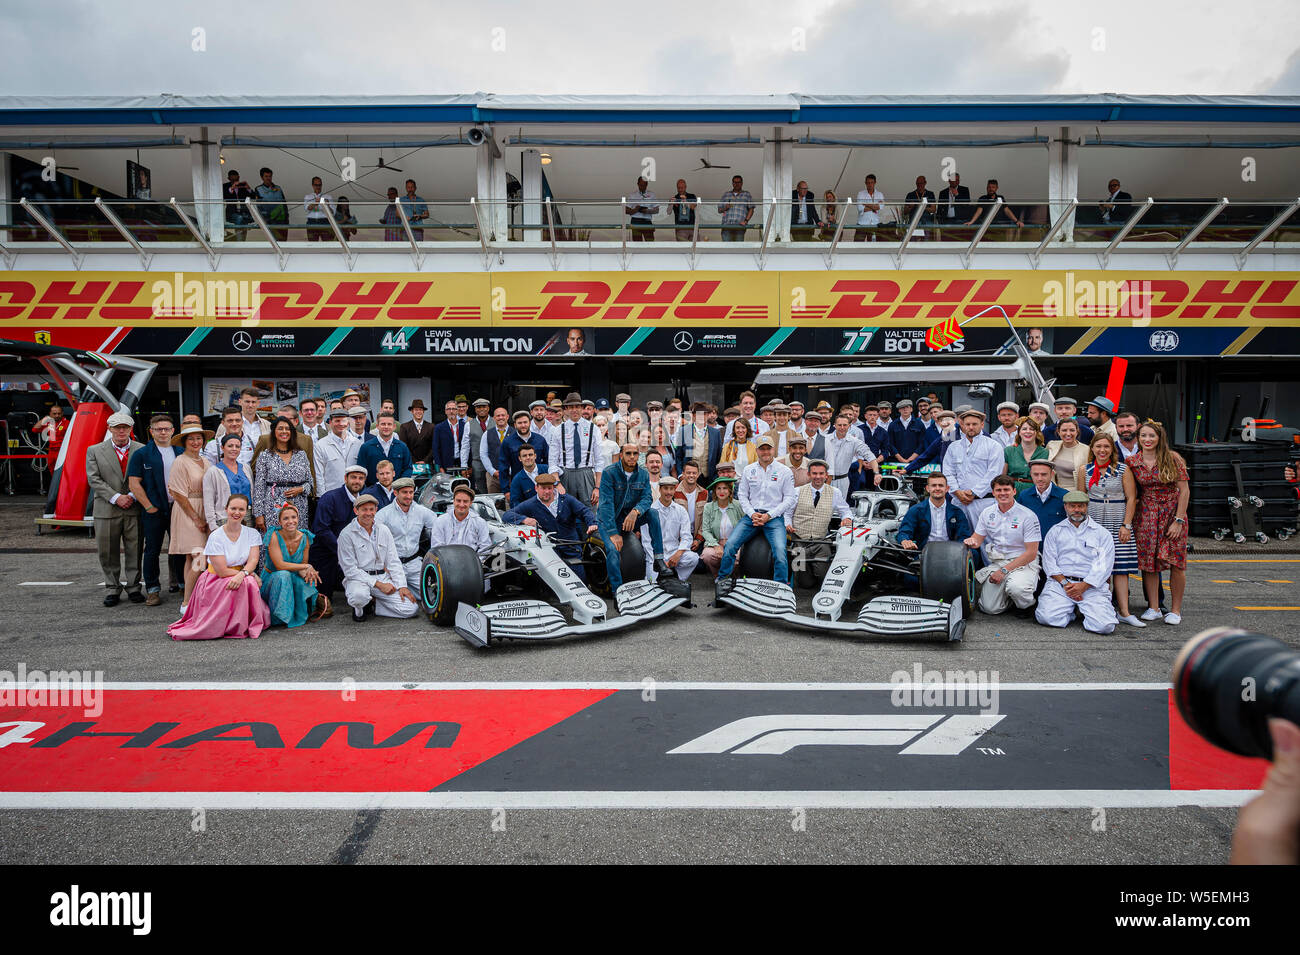 Hockenheim, Germany. 28th July, 2019. Mercedes AMG Petronas F1 Team members pose for a photo prior to the start of the German F1 Grand Prix race, to celebrate 125 years of racing and their 200 starts in Grand Prix races. Credit: SOPA Images Limited/Alamy Live News Stock Photo